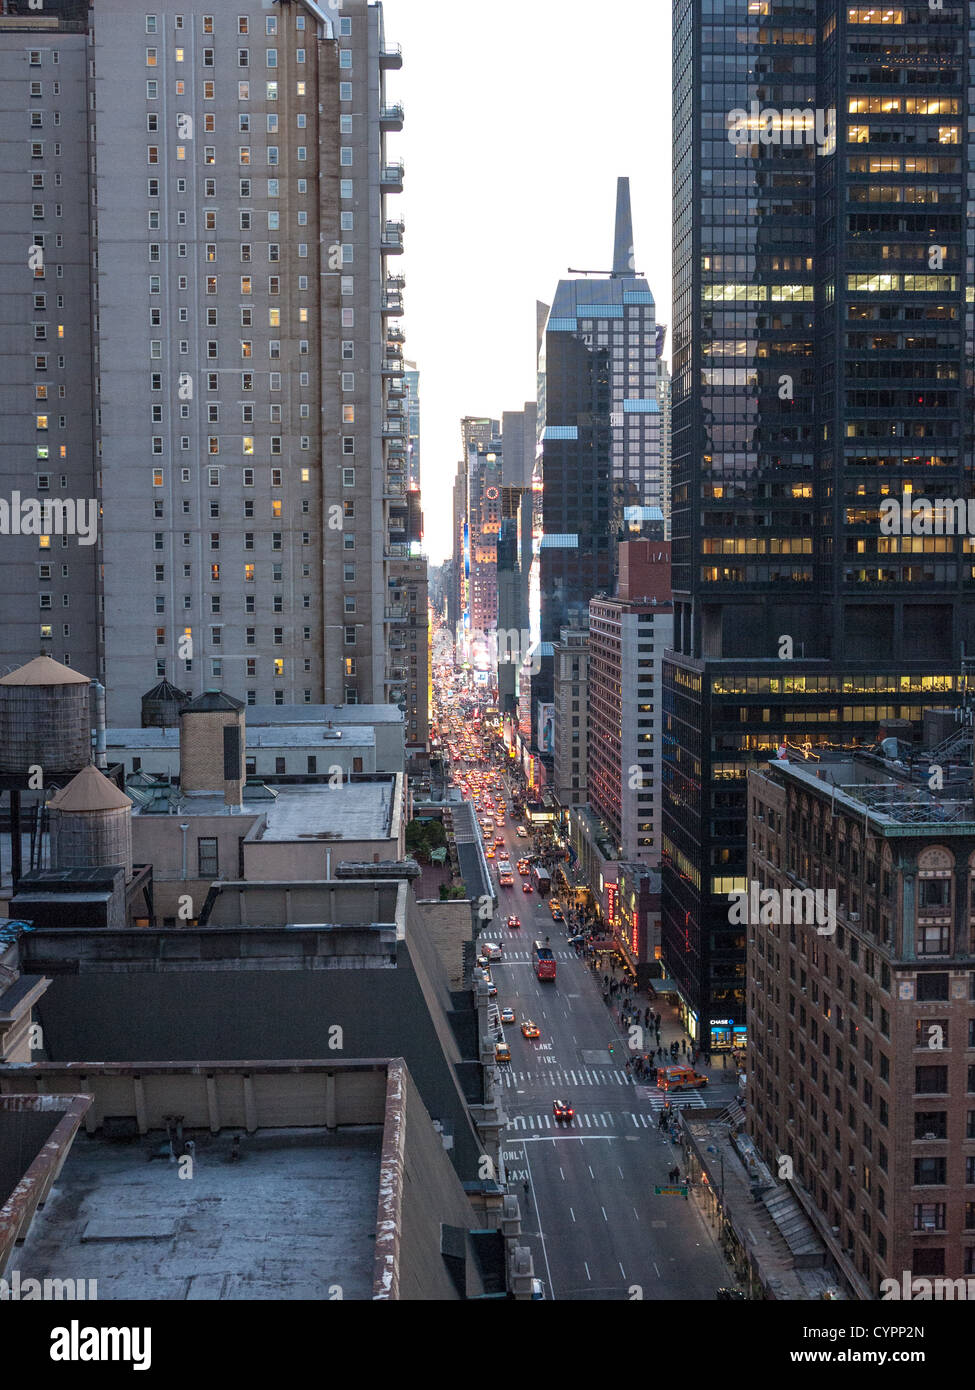 NEW YORK, NY - An elevated view looking down 7th Avenue towards Times Square in New York's Midtown. Stock Photo